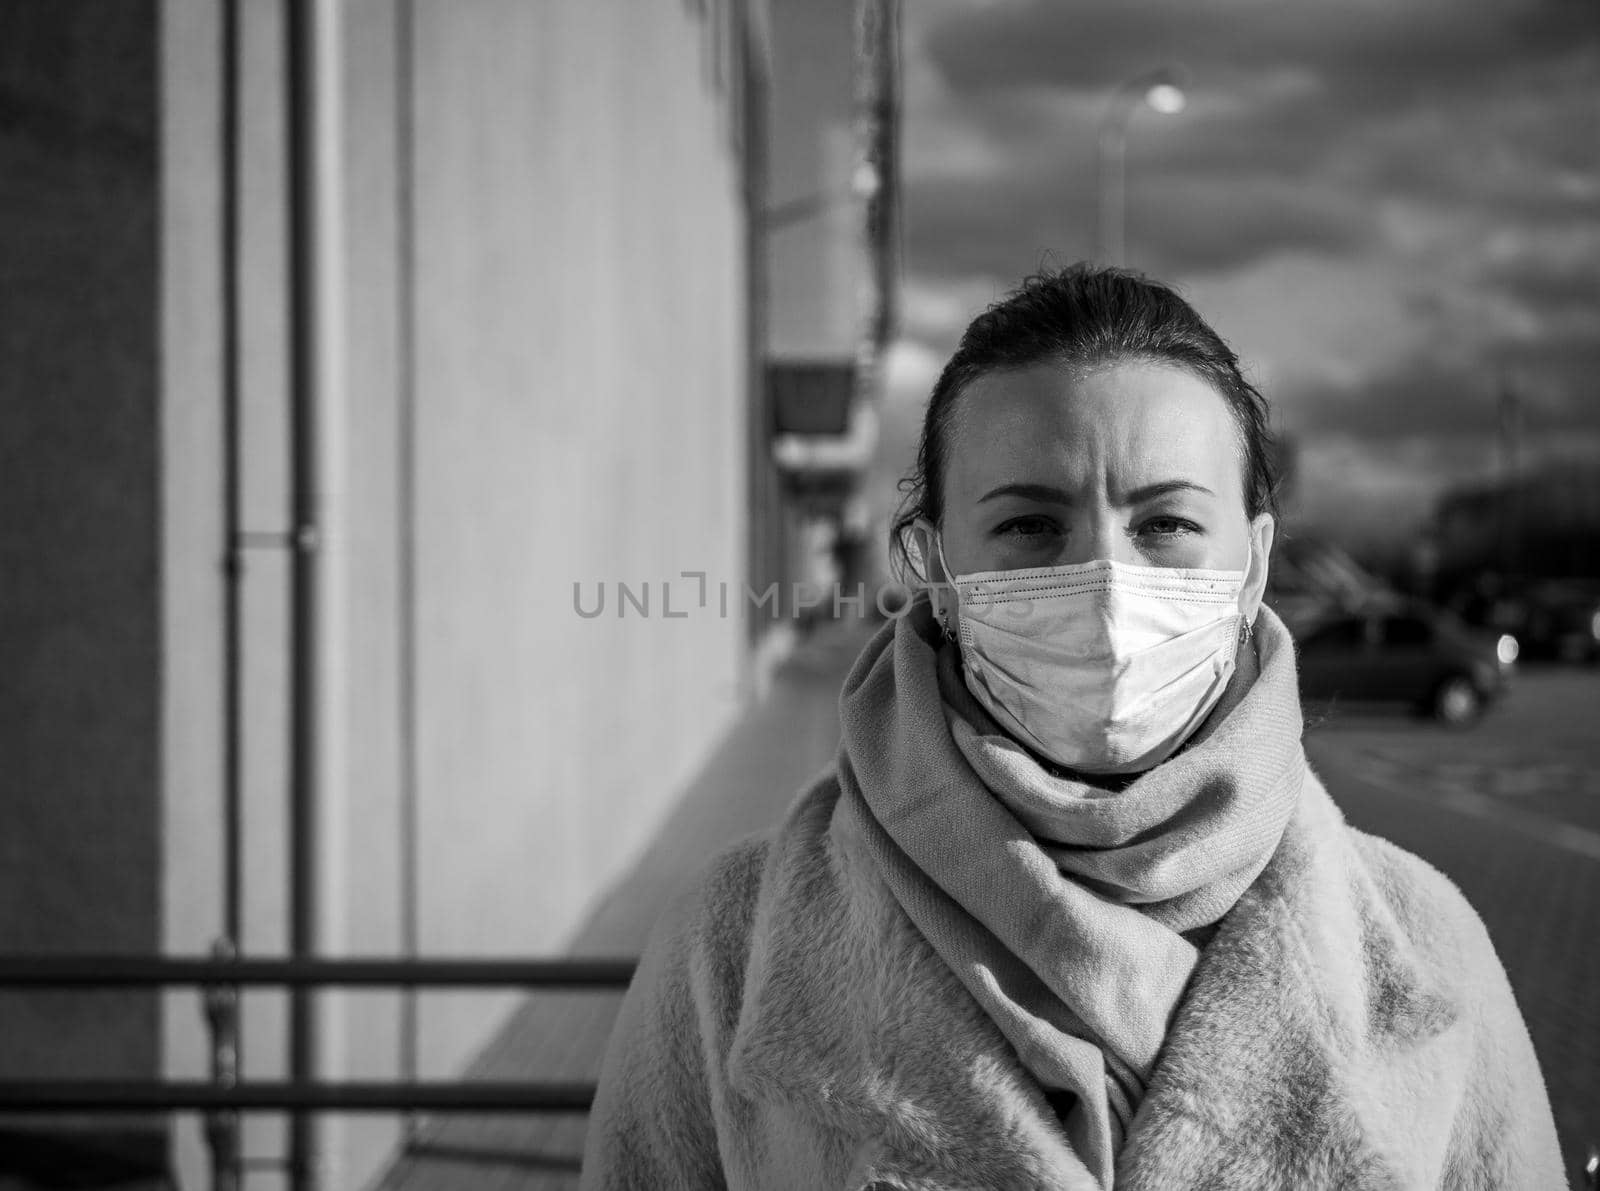 A picture of a girl in a mask. On the street. isolated Covid-19 pandemic.